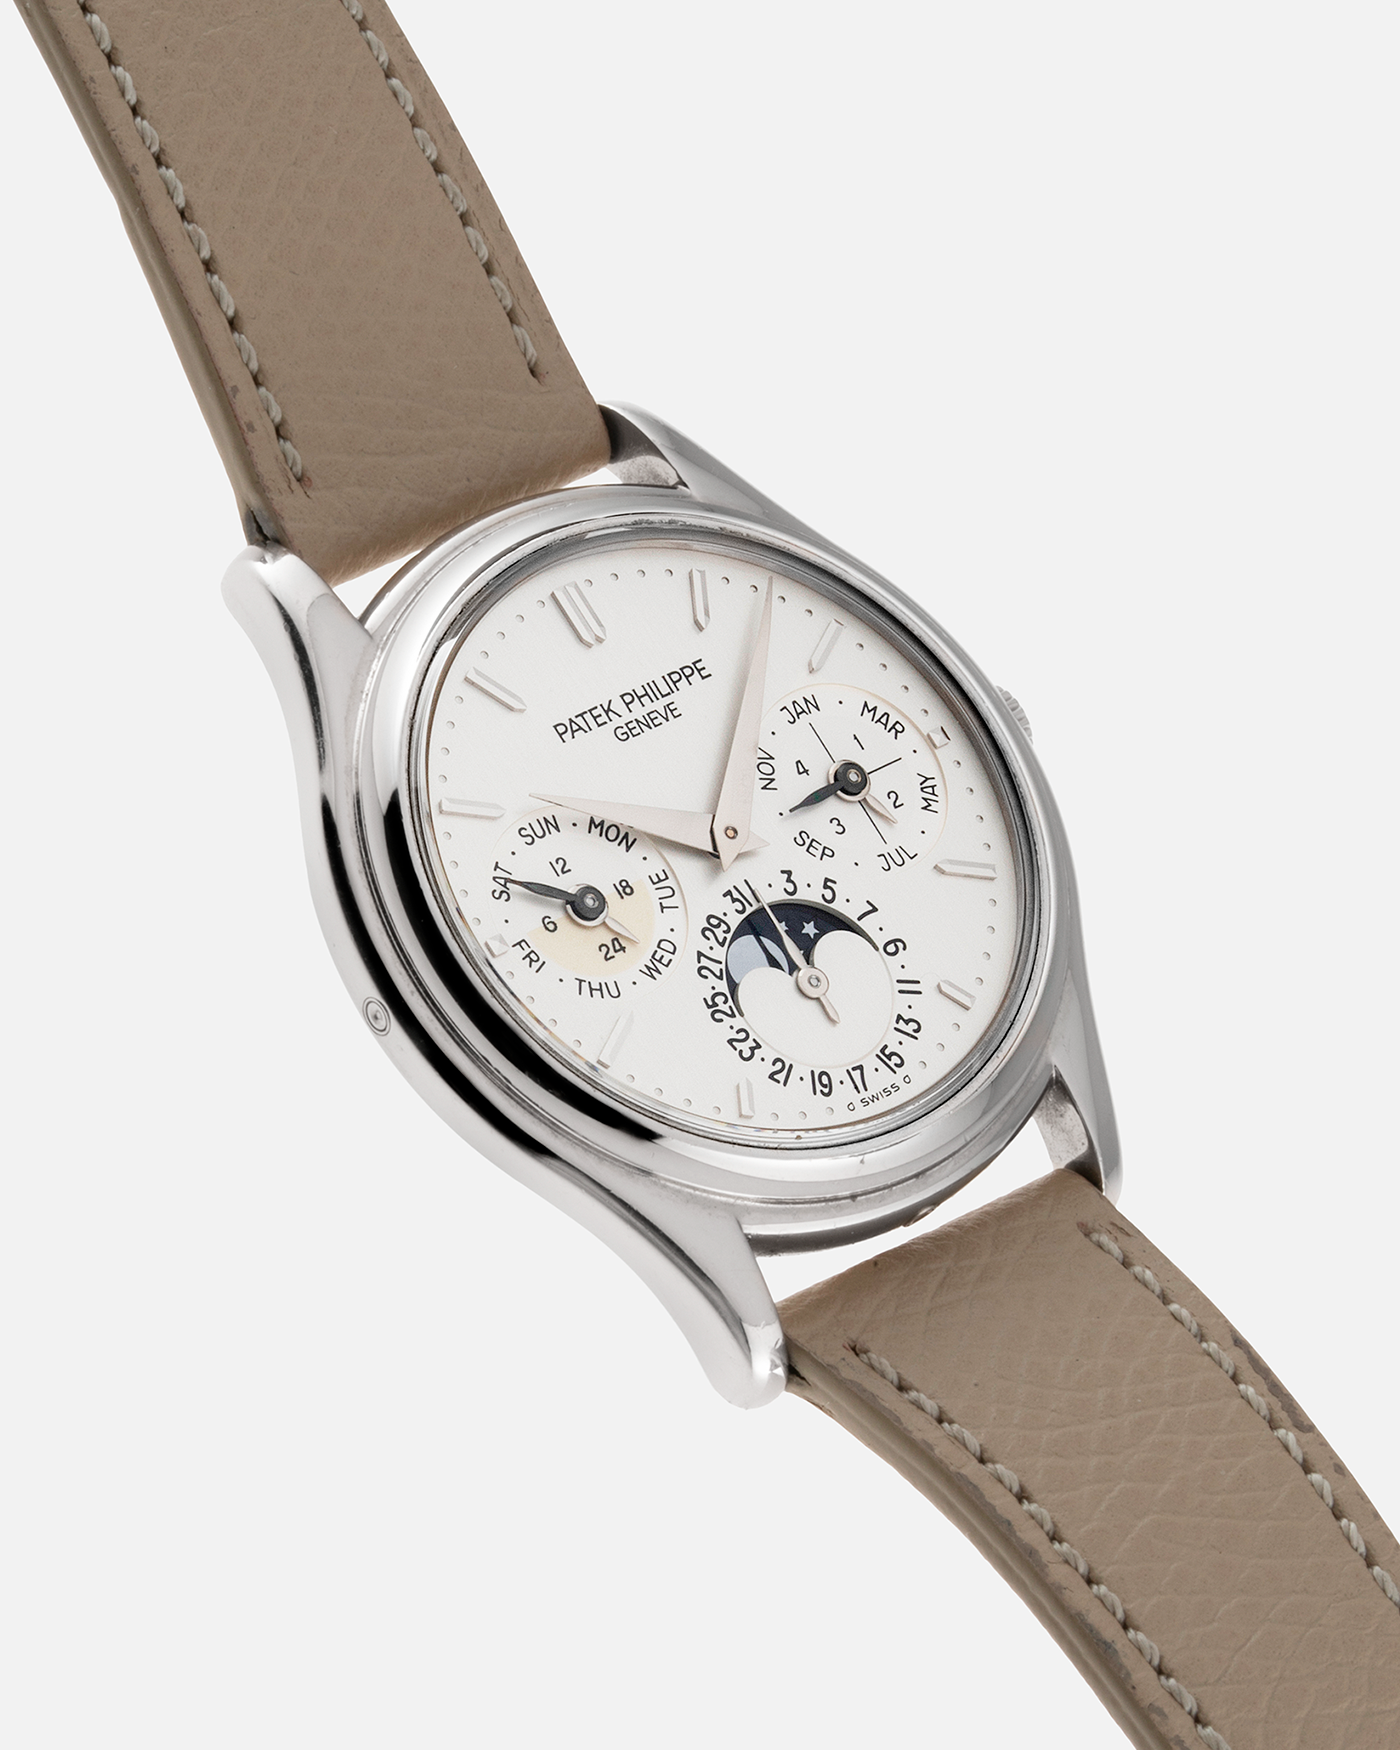 Brand: Patek Philippe Year: 1990’s Model: Perpetual Calendar Reference Number: 3940G Material: 18k White Gold Movement: Cal 240Q Case Diameter: 36mm Bracelet: Taupe Calf Leather Strap and 18k White Gold Patek Philippe Tang Buckle